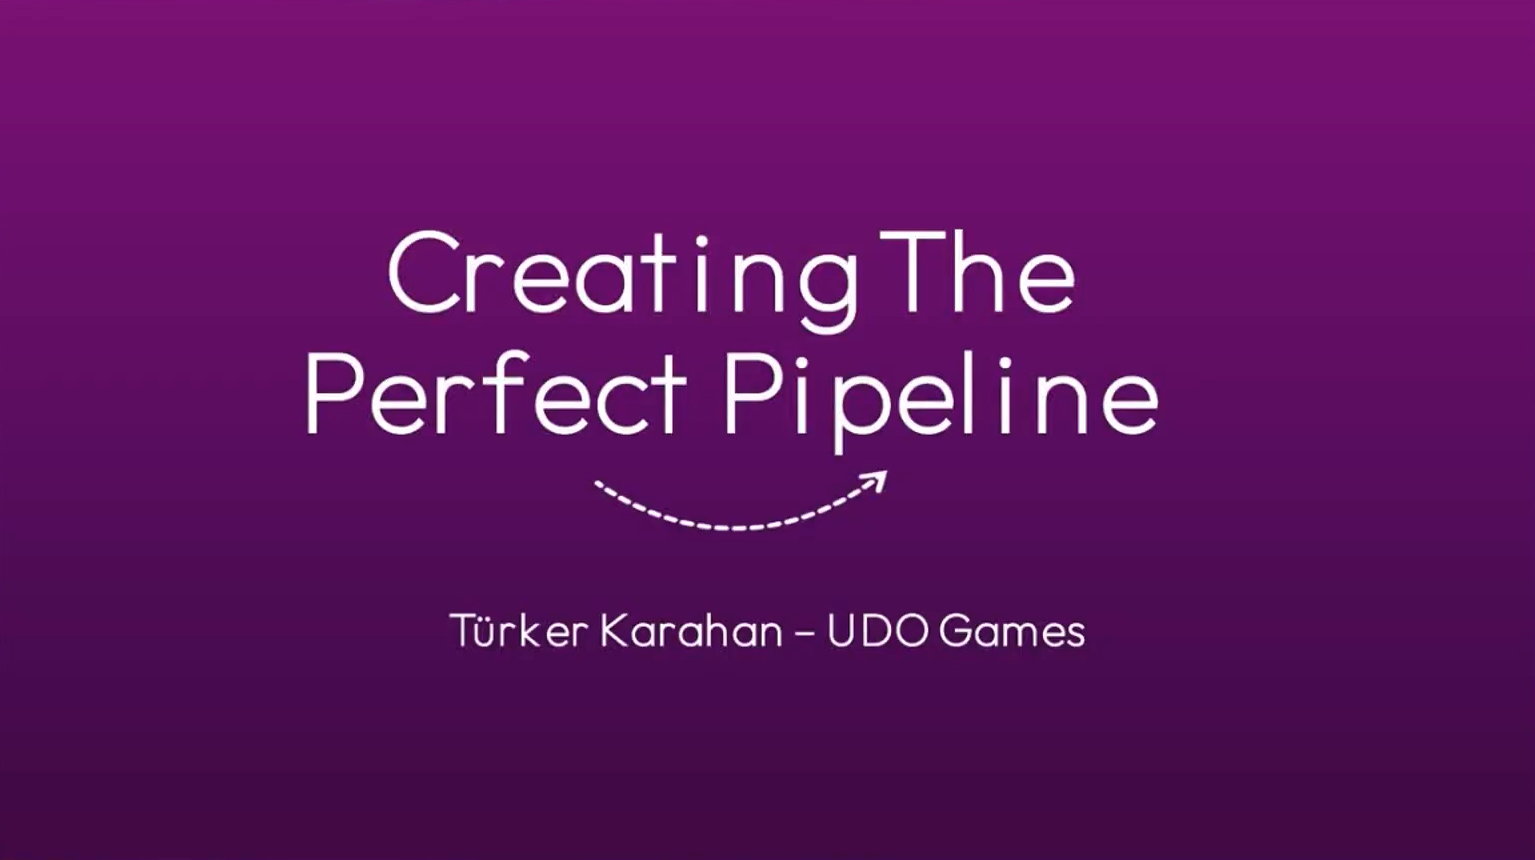 Creating the perfect pipeline